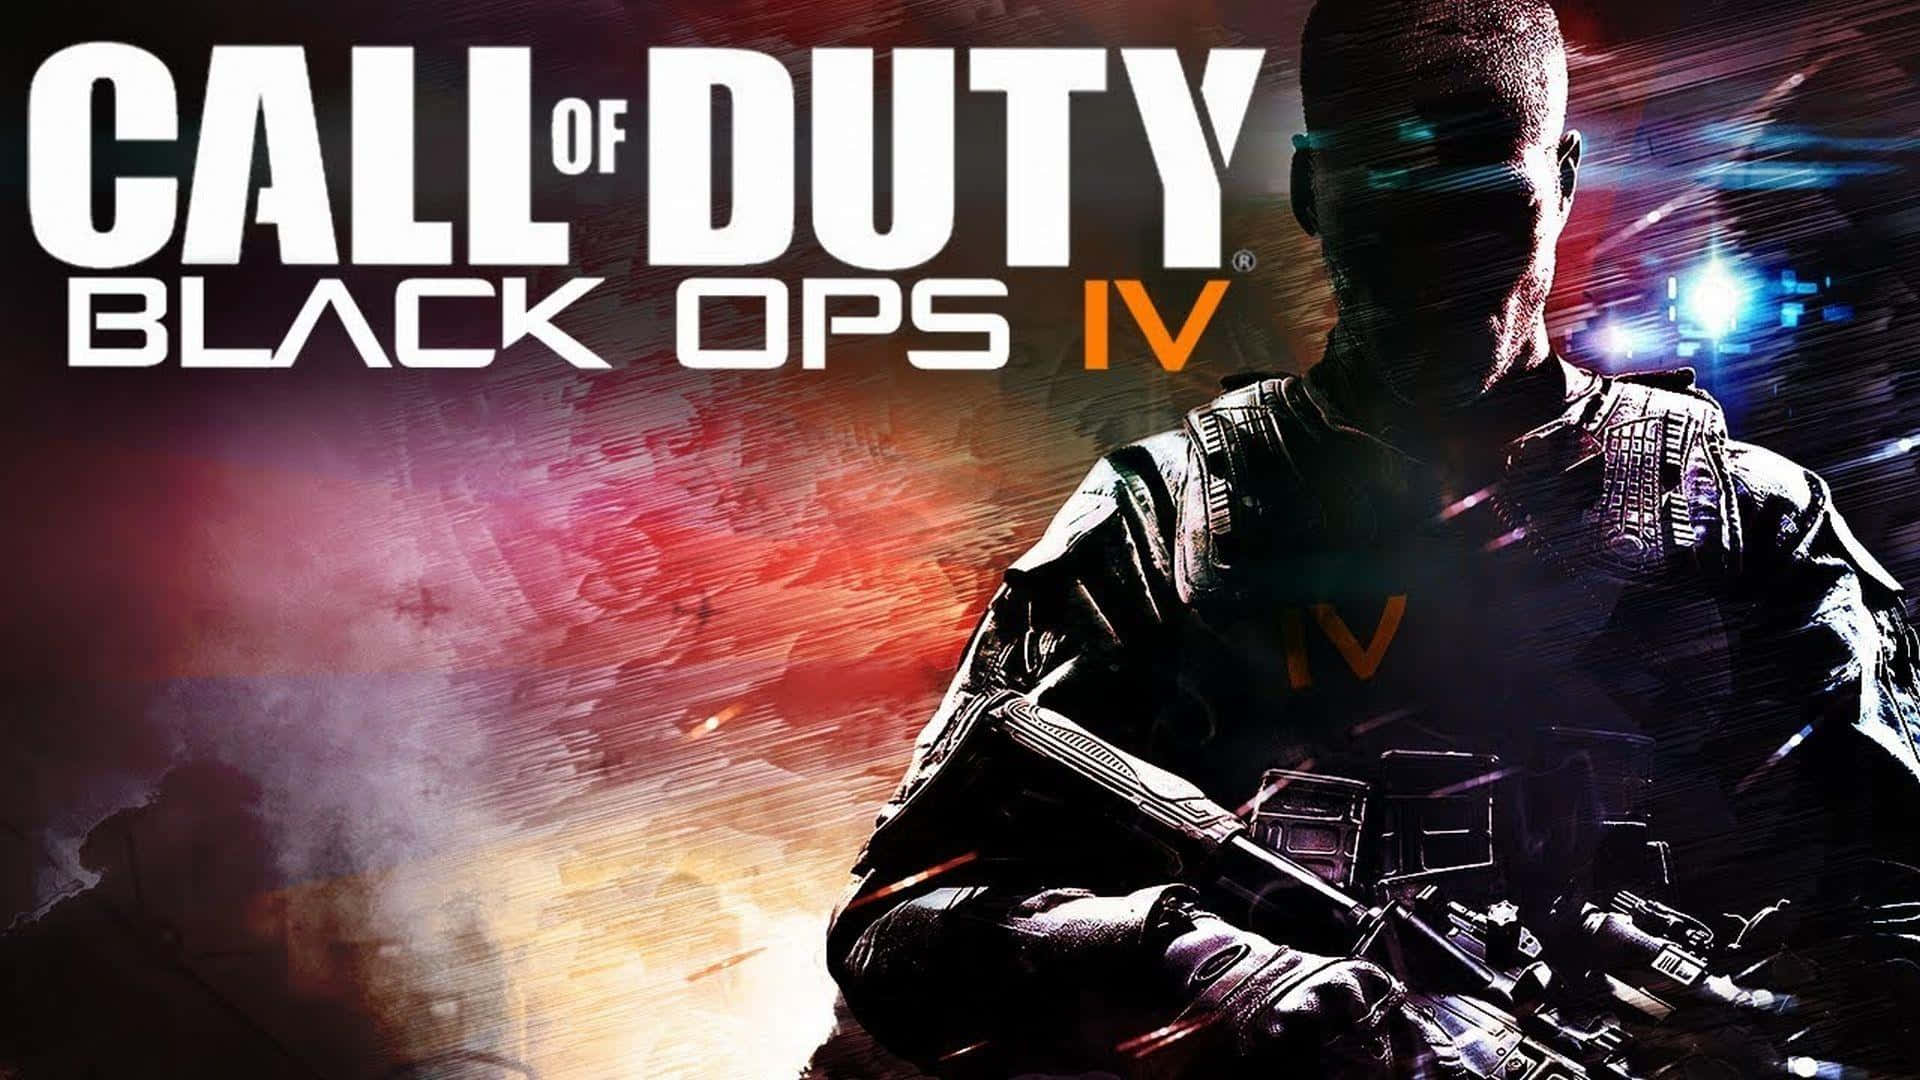 Call Of Duty Black Ops Iv